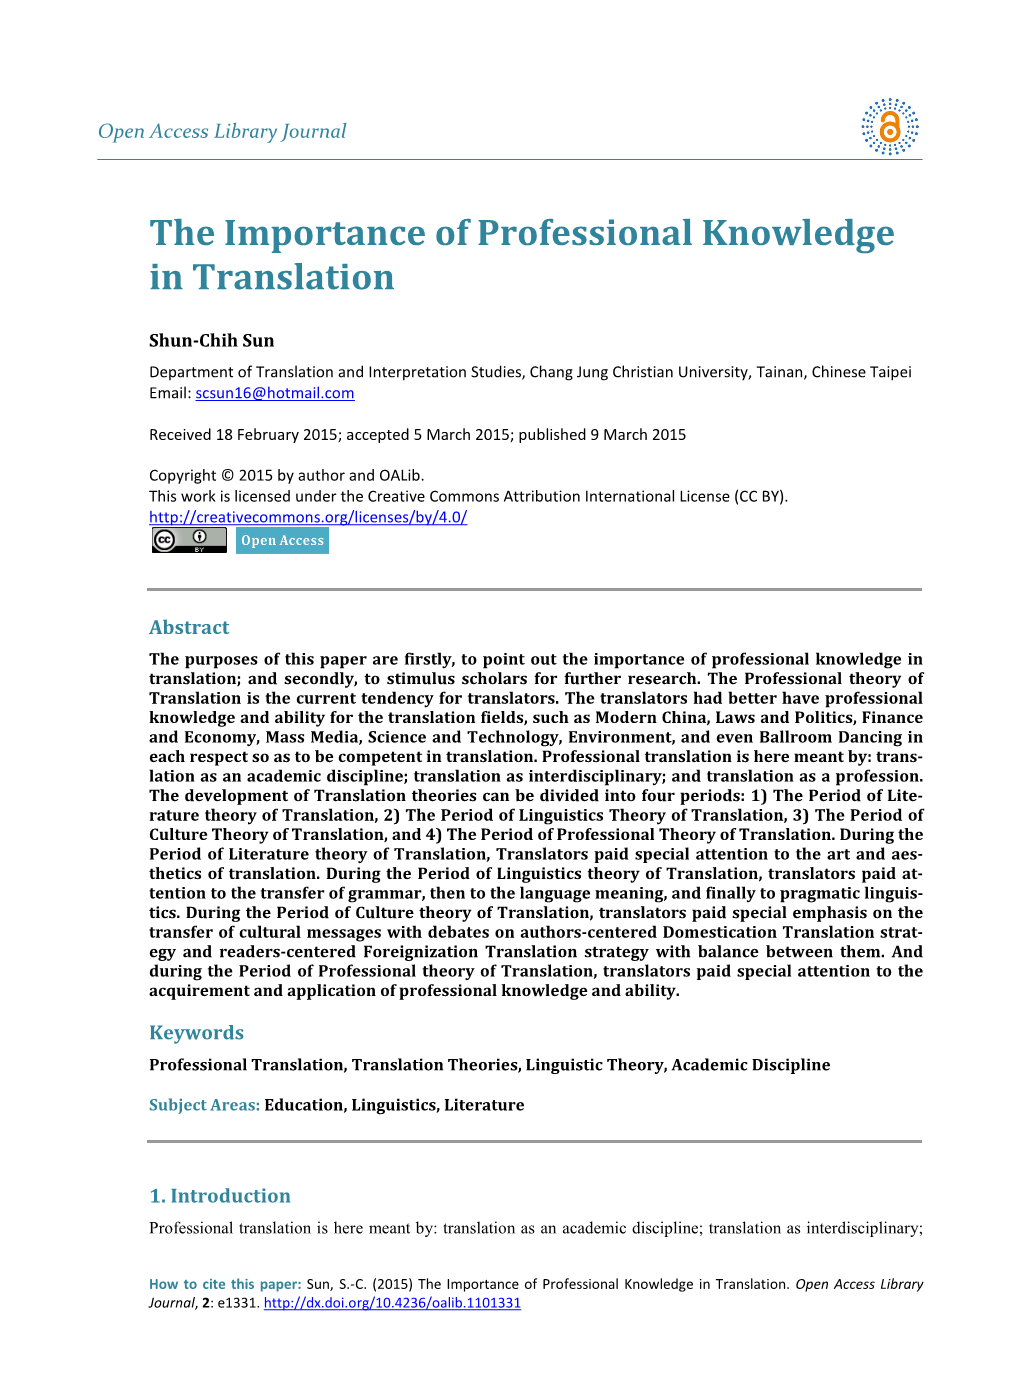 The Importance of Professional Knowledge in Translation